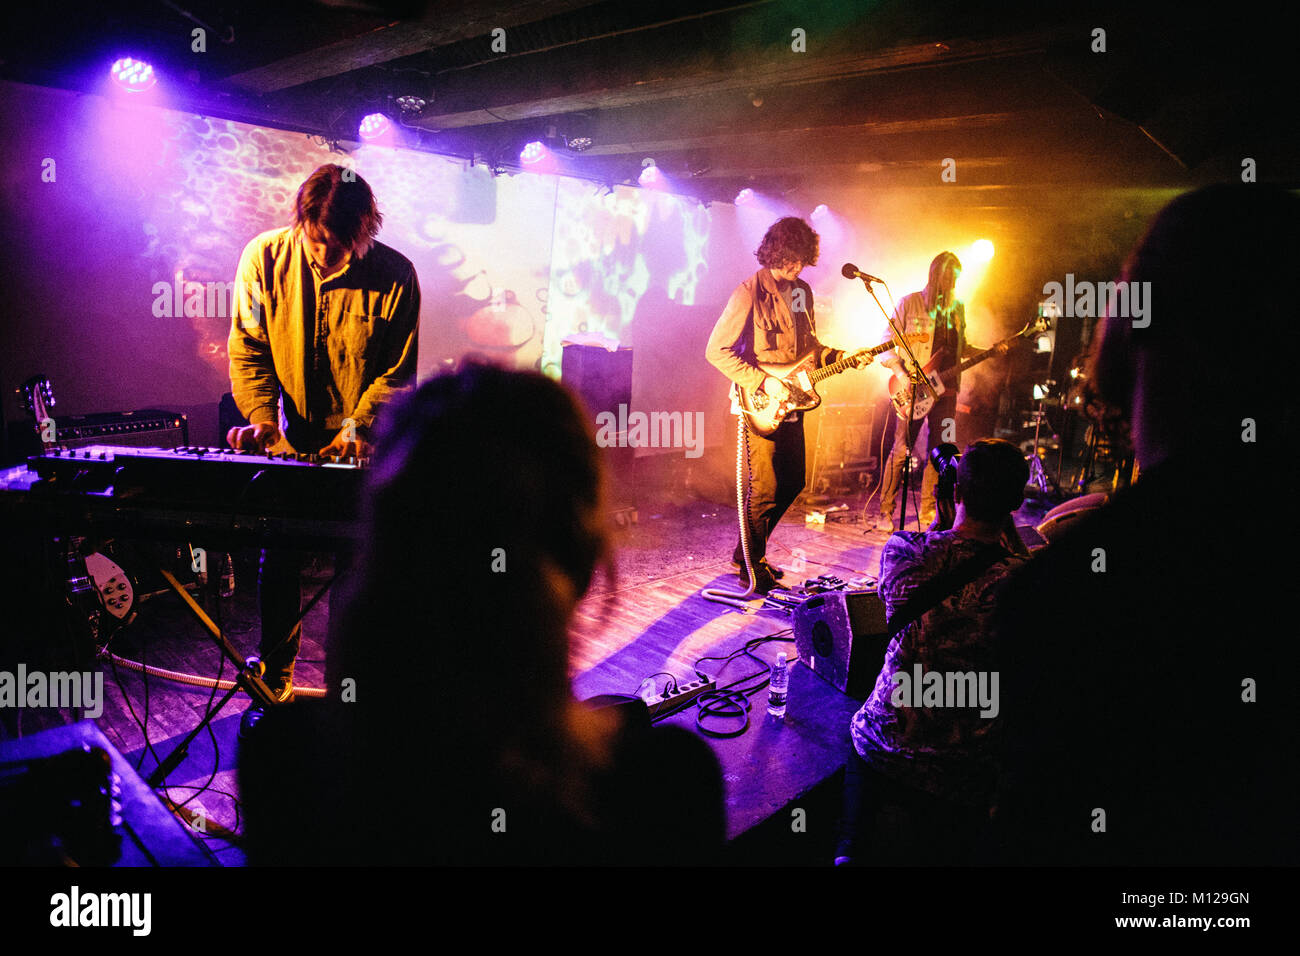 The psychedelic rock band The Revival performs a live concert at Copenhagen Psych 2016. Denmark, 13/07 2016 Stock Photo - Alamy